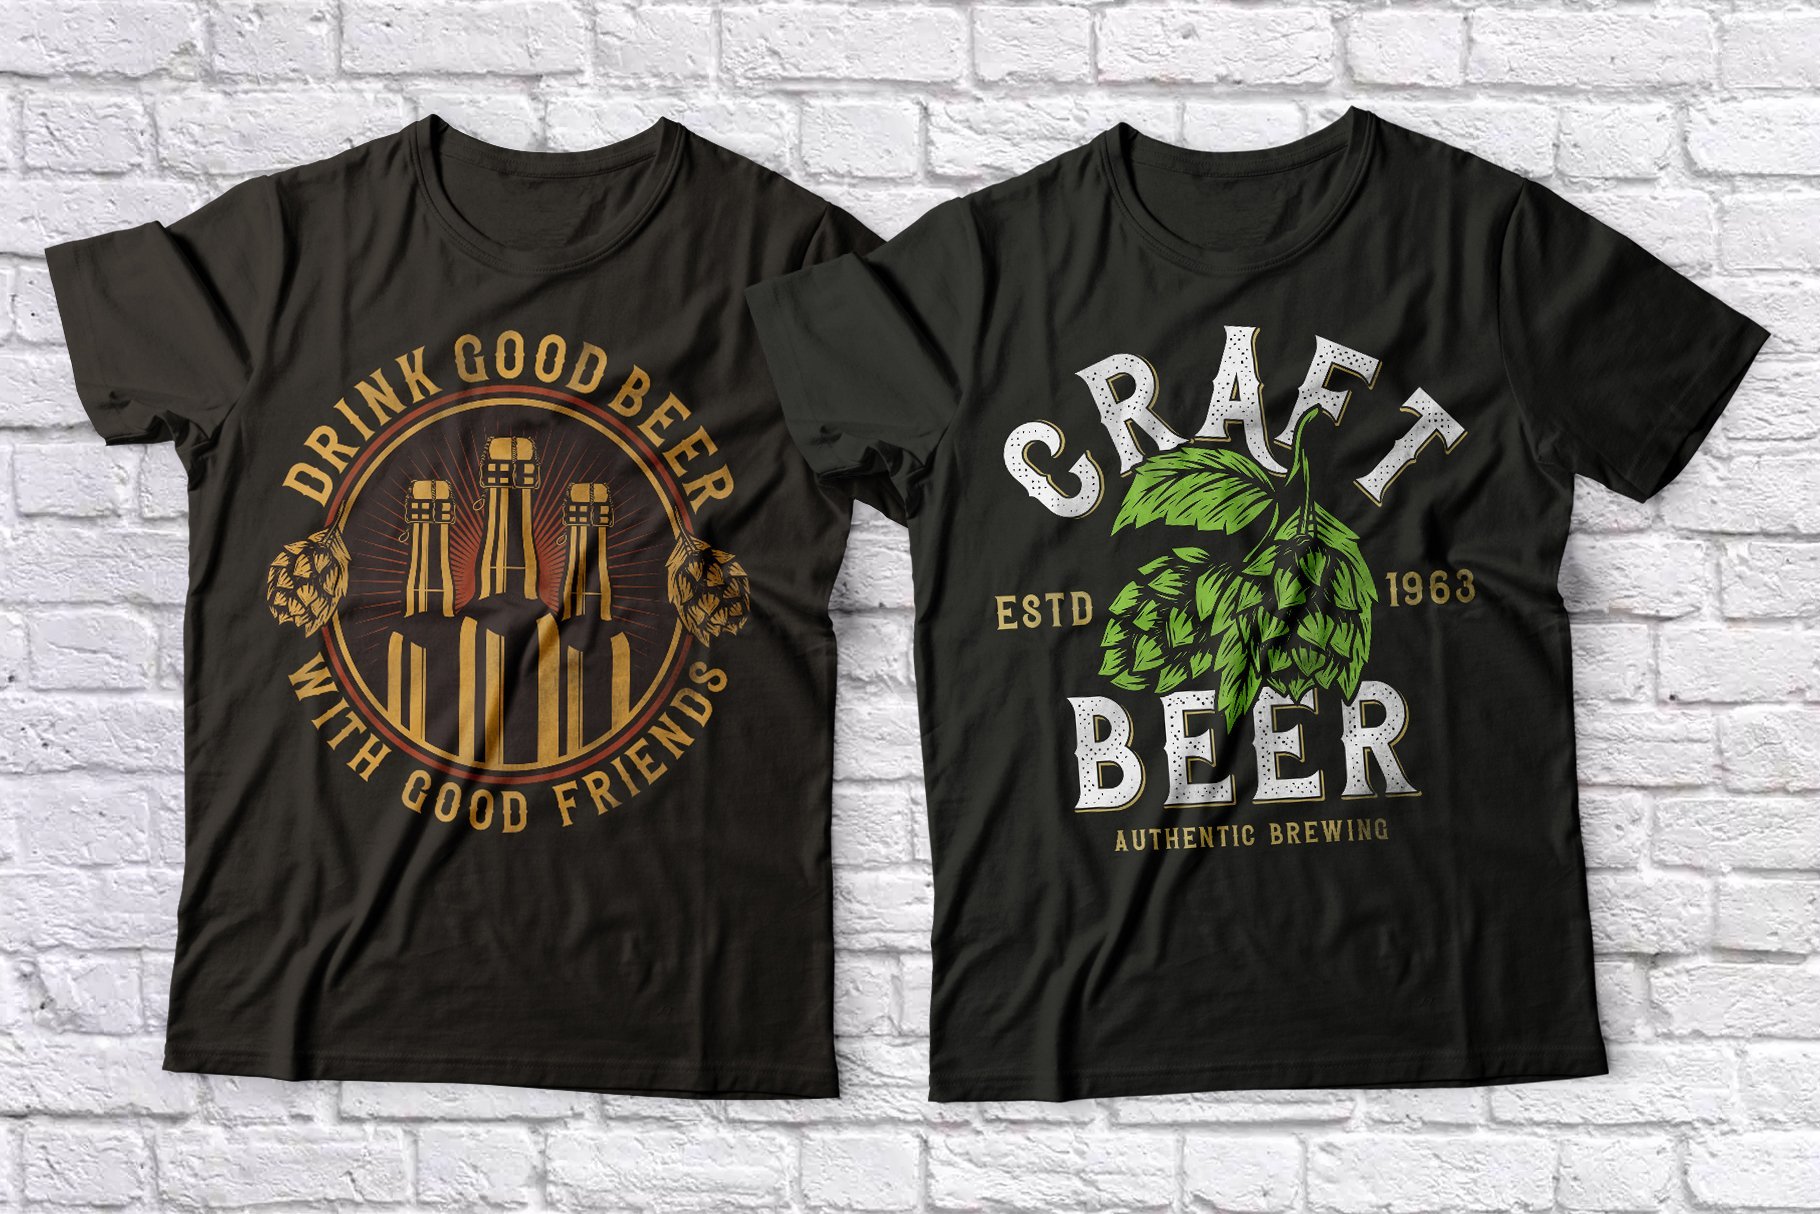 T-shirts with bottles of beer.